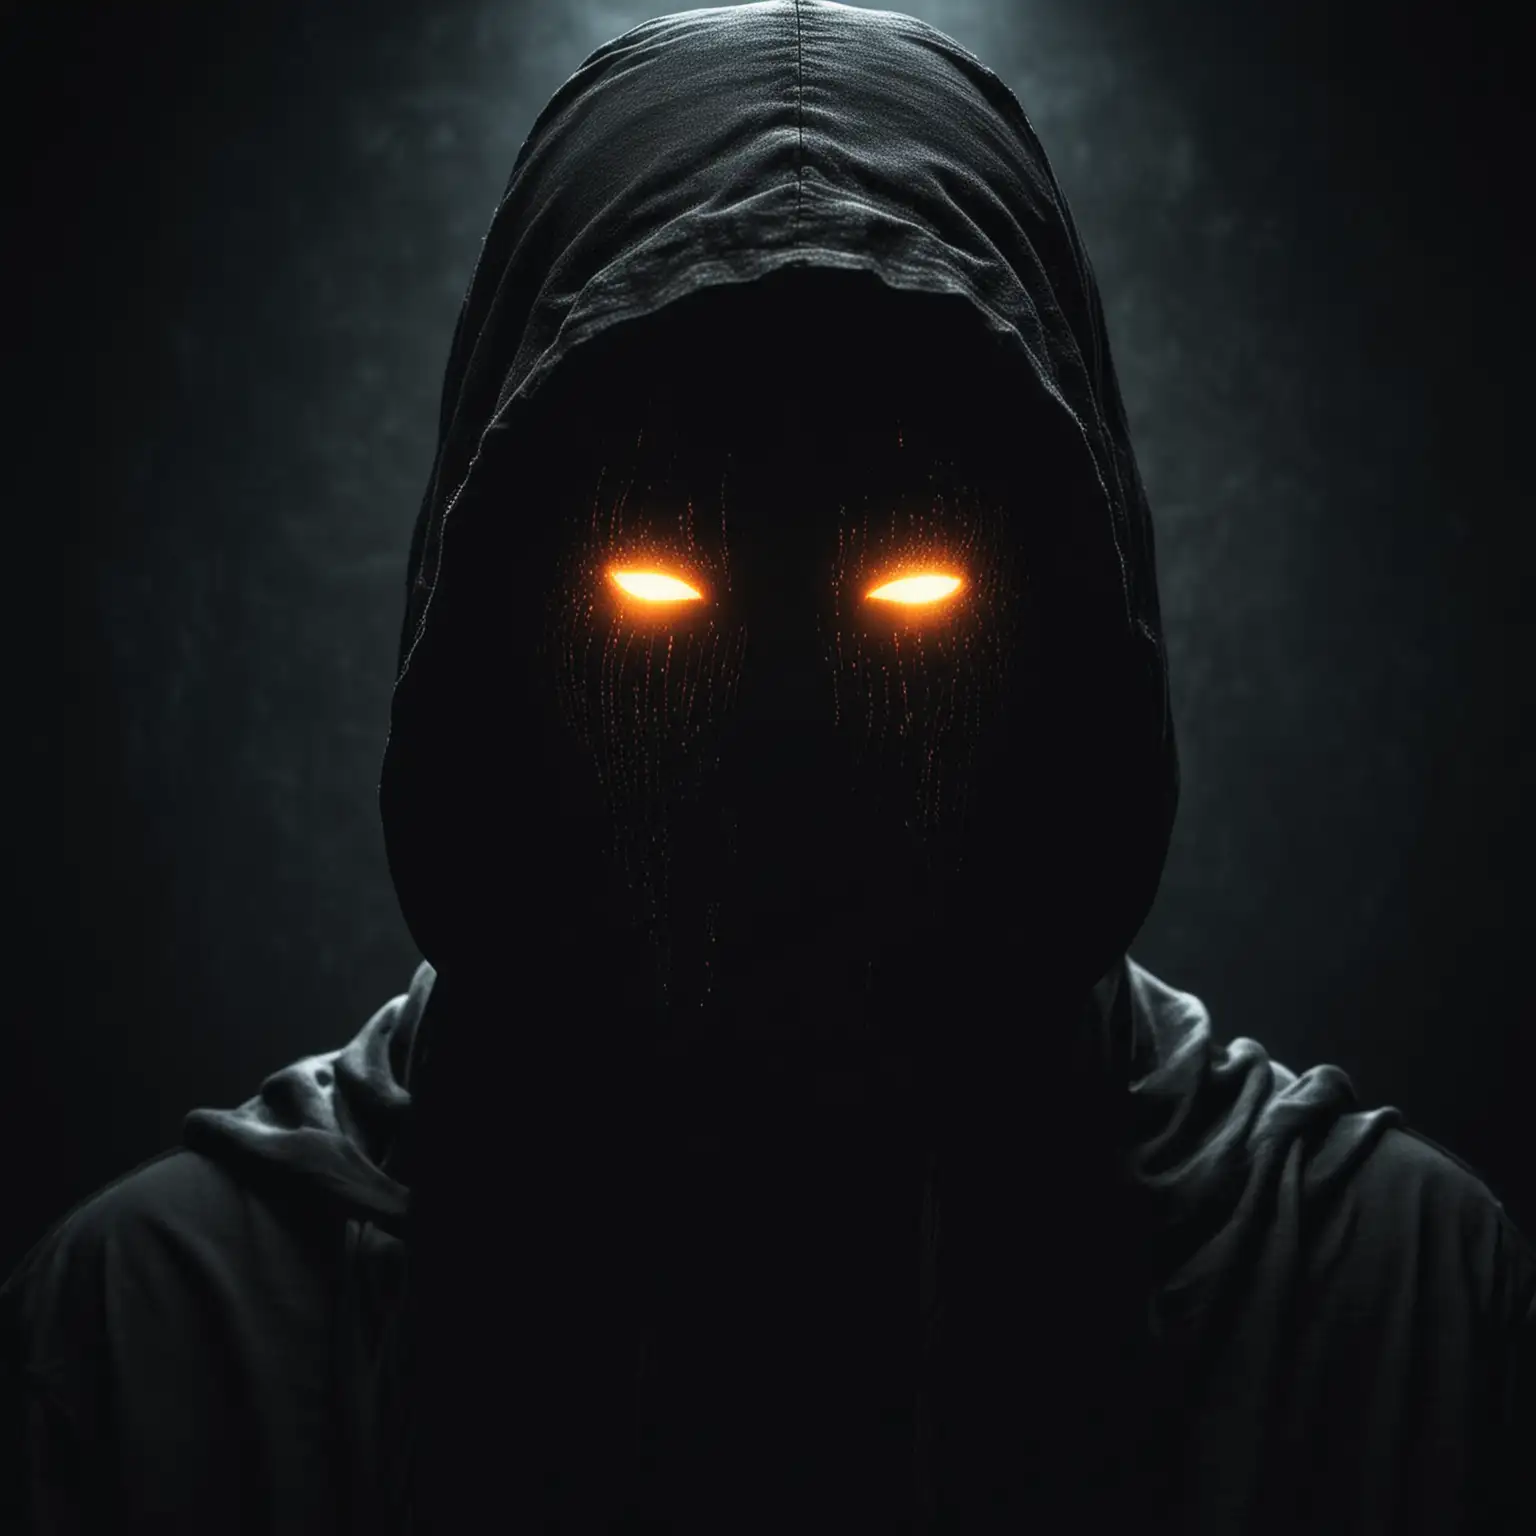 Mysterious Figure with Glowing Eyes in Hooded Darkness